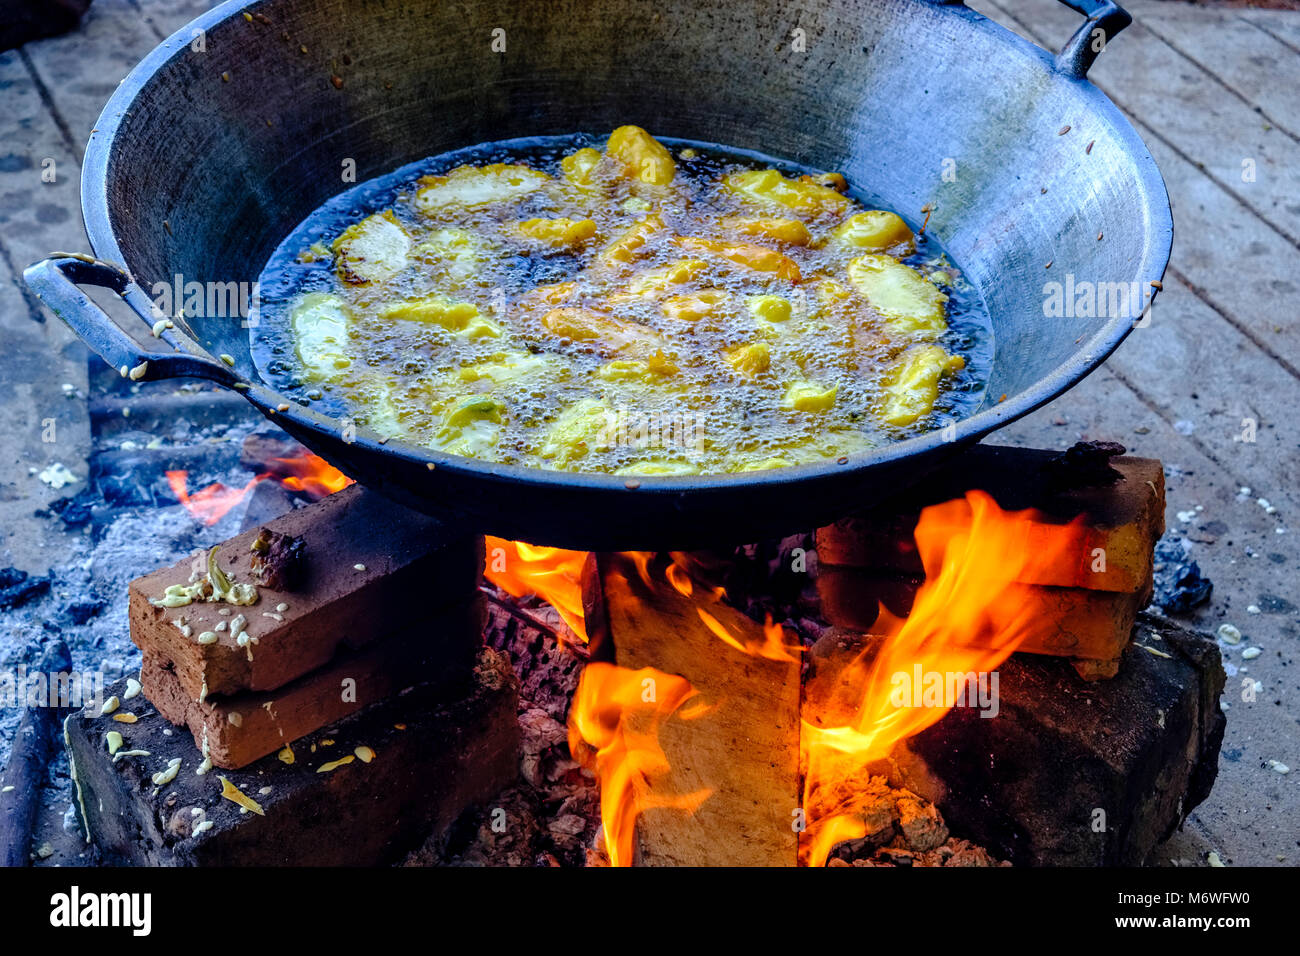 https://c8.alamy.com/comp/M6WFW0/snacks-in-a-pan-with-oil-are-fried-on-open-fire-in-the-street-market-M6WFW0.jpg